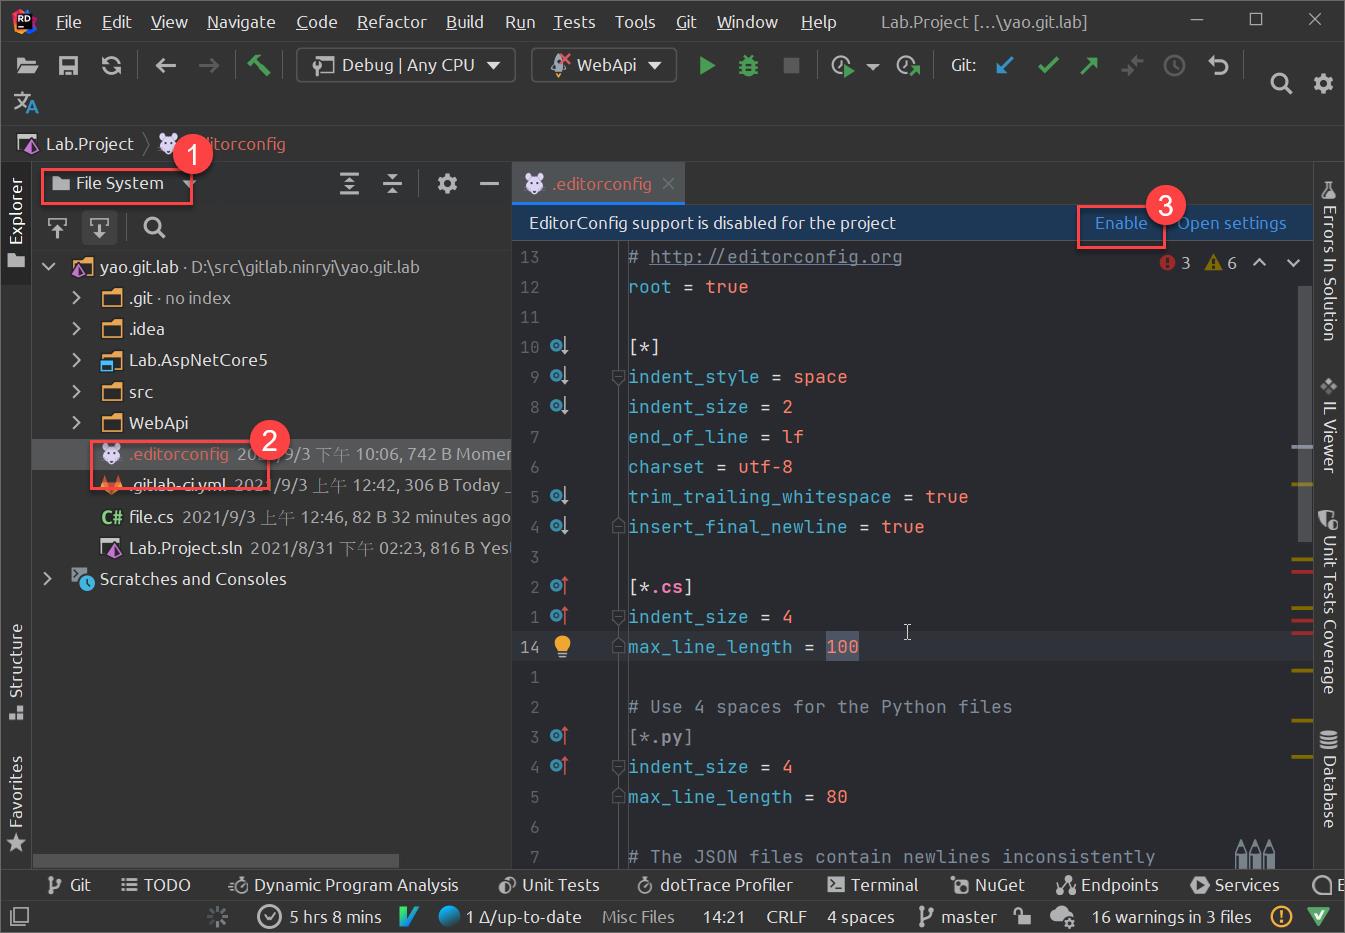 File 
Edit 
View 
Navigate 
•torconfig 
Code Refactor Build Run 
Debug I Any CPU v 
Tests Tools 
WebApi 
.editorconfig X 
Git 
Window 
Help 
Lab.Project C. 
..\yao.git.lab] 
x 
Lab.Project 
File System 
yao.git.lab • 
EditorConfig support is disabled for the project 
http: //editorconfig . org 
root 
= true 
•ndent_styte = space 
•ndent size = 2 
nd of tine = If 
harset 
= utf-8 
rim_traiting_whitespace 
= true 
•nsert final newline 
= true 
.cs] 
•ndent size = 4 
Use 4 spaces for the Python files 
Enable Open settings 
03 A 6 A v 
.git • no index 
.idea 
Lab.AspNetCore5 
WebApi 
.editorcontig 10:06, 742 B Mome 
/9/3 _L{F 12:42, 306 B Today _ 
C# file.cs 2021/9/3 _E{F 12:46, 82 B 32 minutes ago 
IT Lab.Project.sln 2021/8/31 02:23, 816B Yesi 
Scratches and Consoles 
13 
12 
11 
9 
8 
6 
3 
2 
1 
14 
1 
2 
3 
4 
6 
7 
01 
01 
01 
01 
•ndent size = 4 
The JSON files 
= 80 
contain newlines inconsistently 
p Git 
TODO 
Dynamic Program Analysis 
6) Unit Tests dotTrace Profiler 
5 hrs 8 mins V 1 A/up-to-date Misc Files 
14:21 CRLF 
E Terminal NuGet Endpoints O Services 
p master 16 warnings in 3 files (D 
4 spaces 